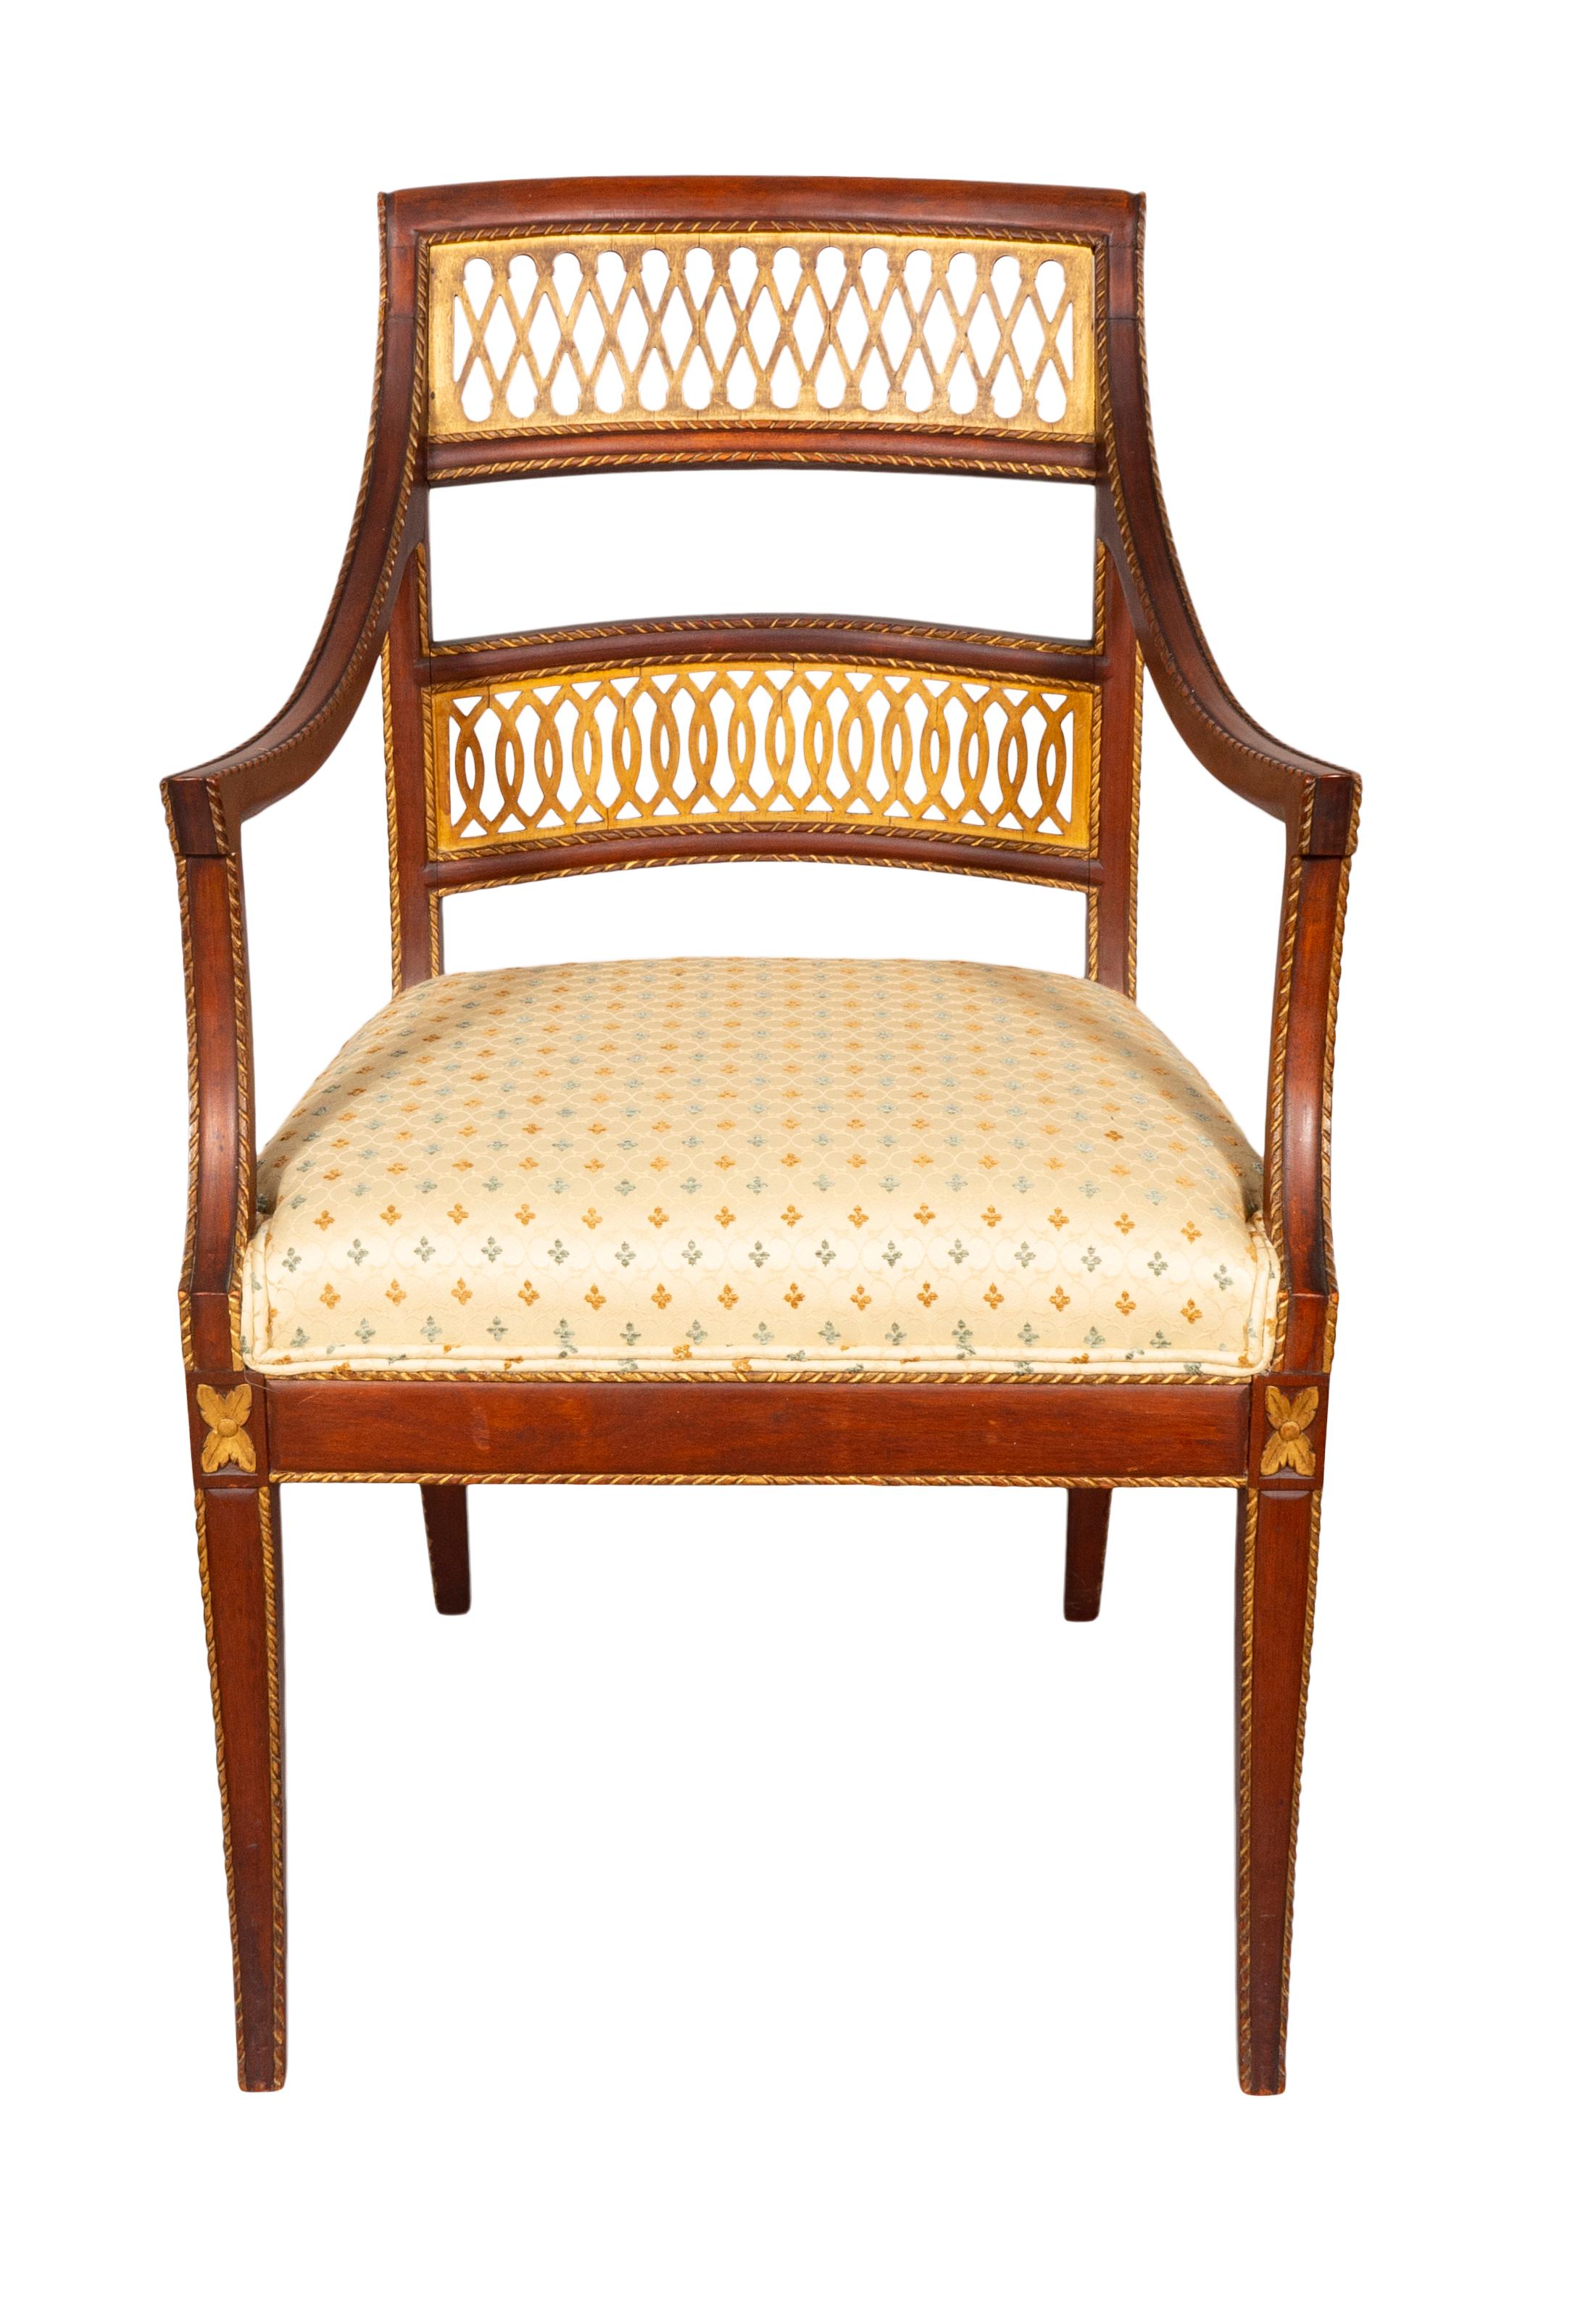 Each with lattice backs, carved arms square seat and raised on square tapered legs with carved detail and gilt accents. Very comfortable and useable.